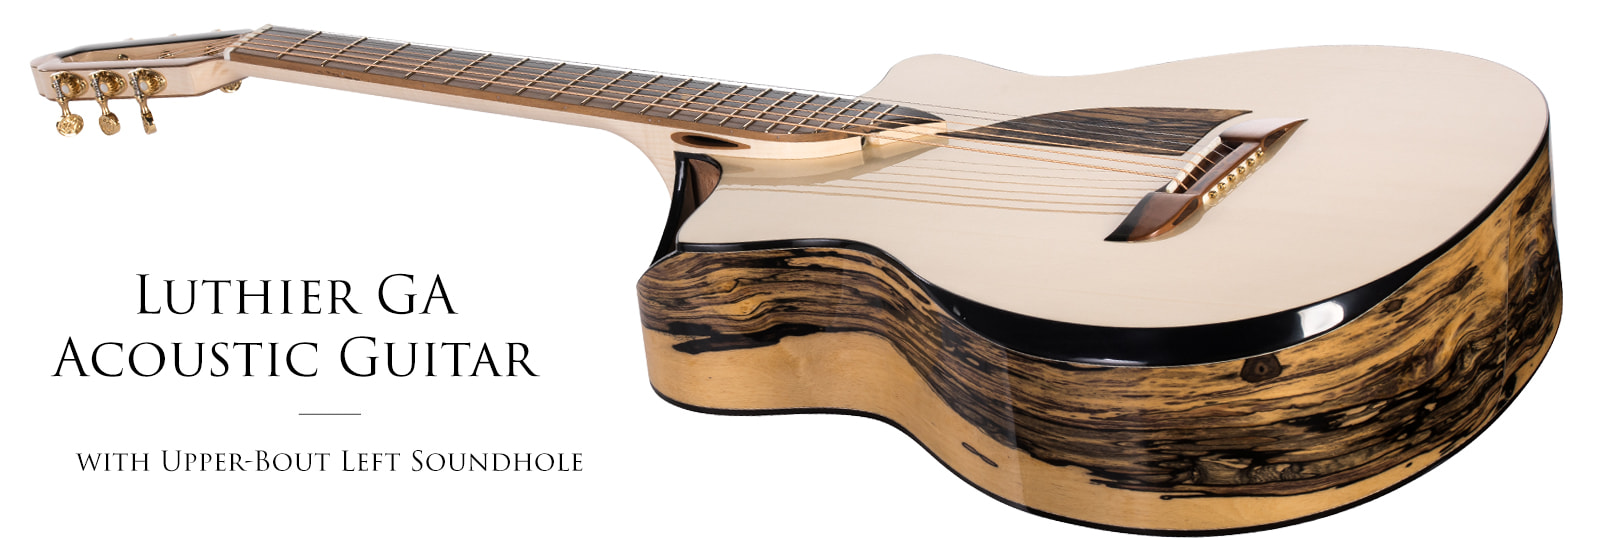 disgusting Arrow Emperor The world's finest and most innovative - Turkowiak Guitars